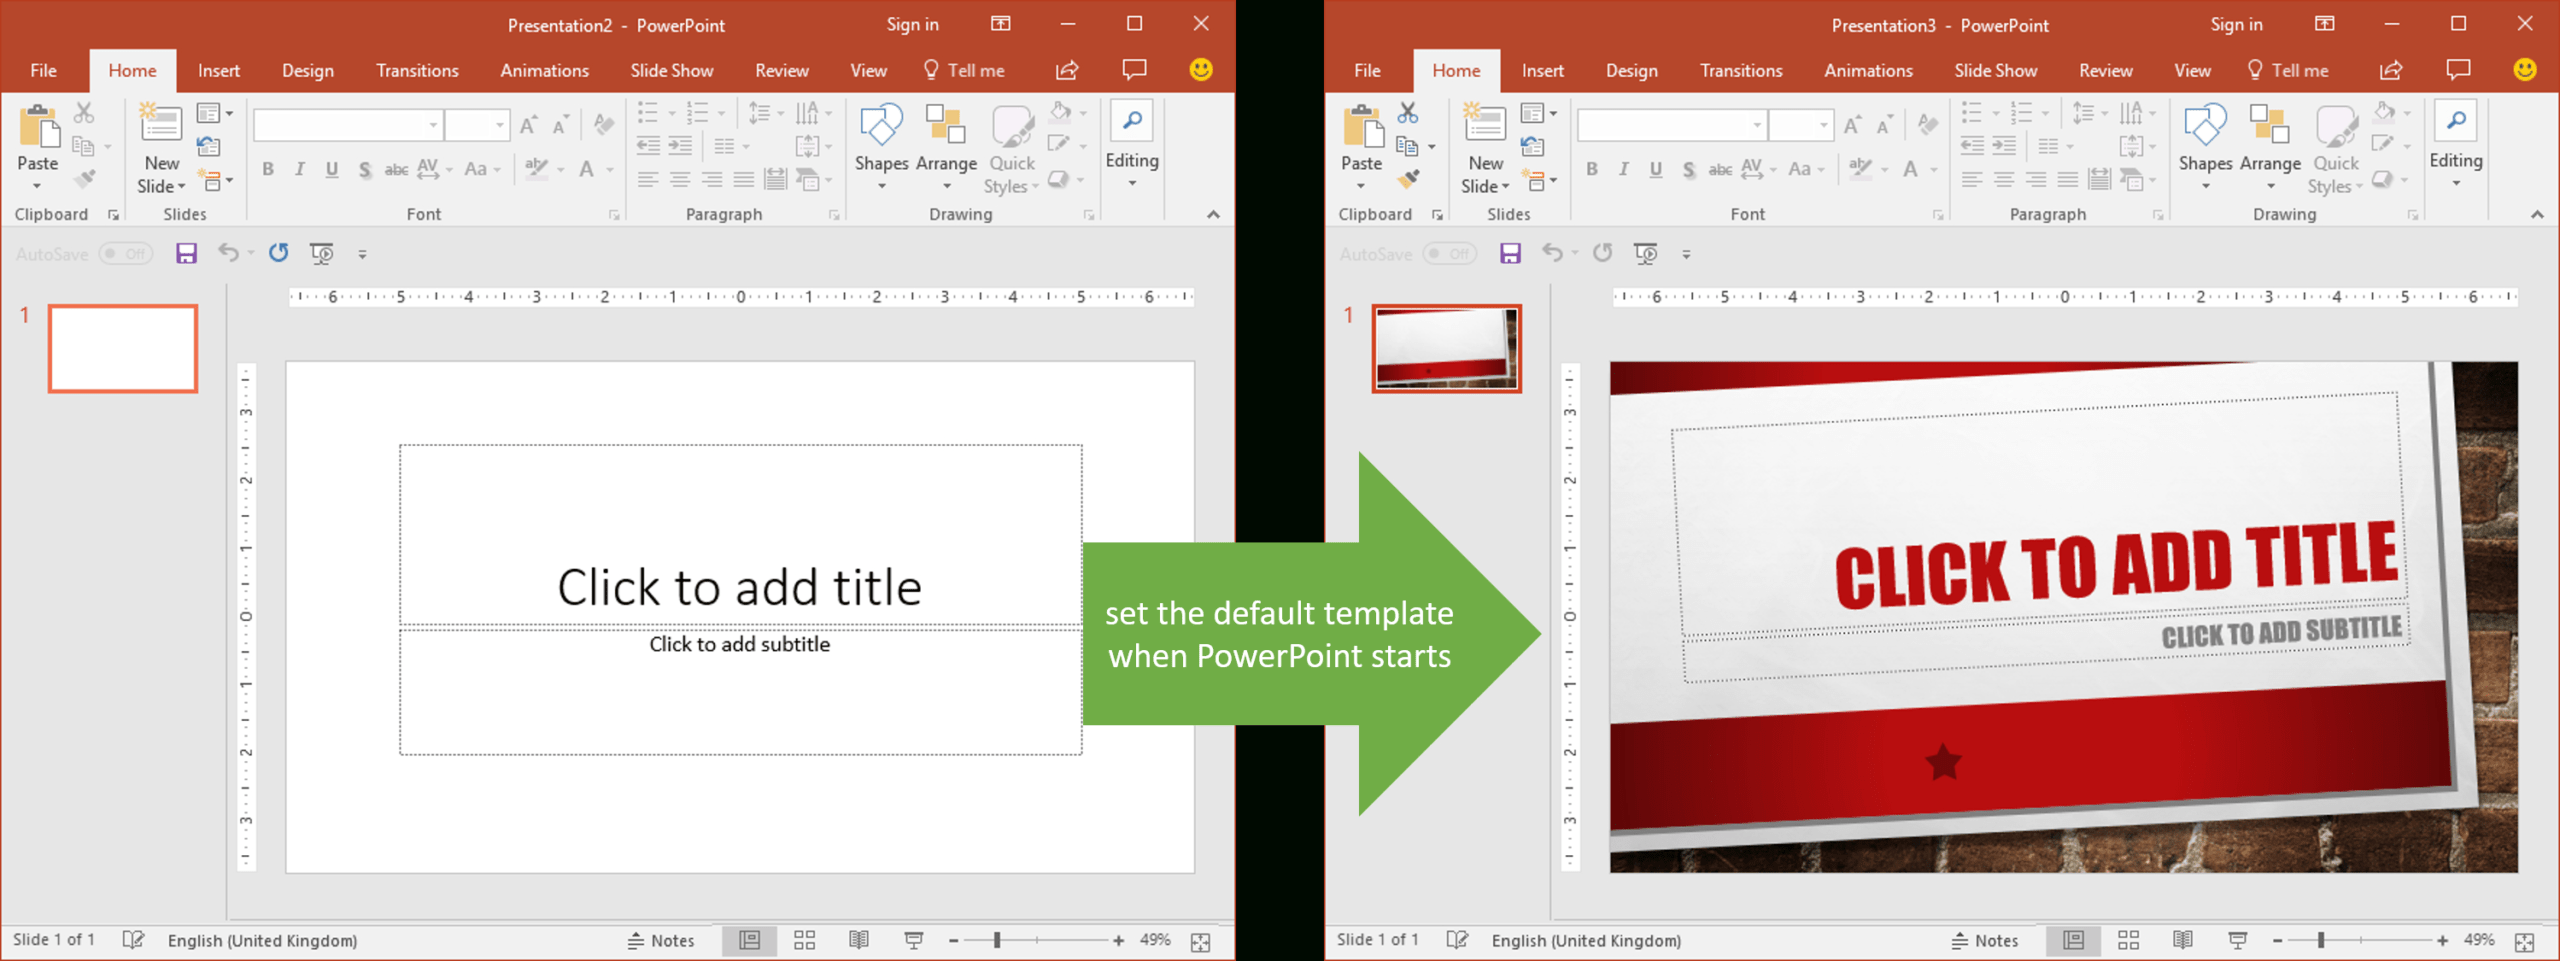 Set The Default Template When Powerpoint Starts | Youpresent Regarding Where Are Powerpoint Templates Stored